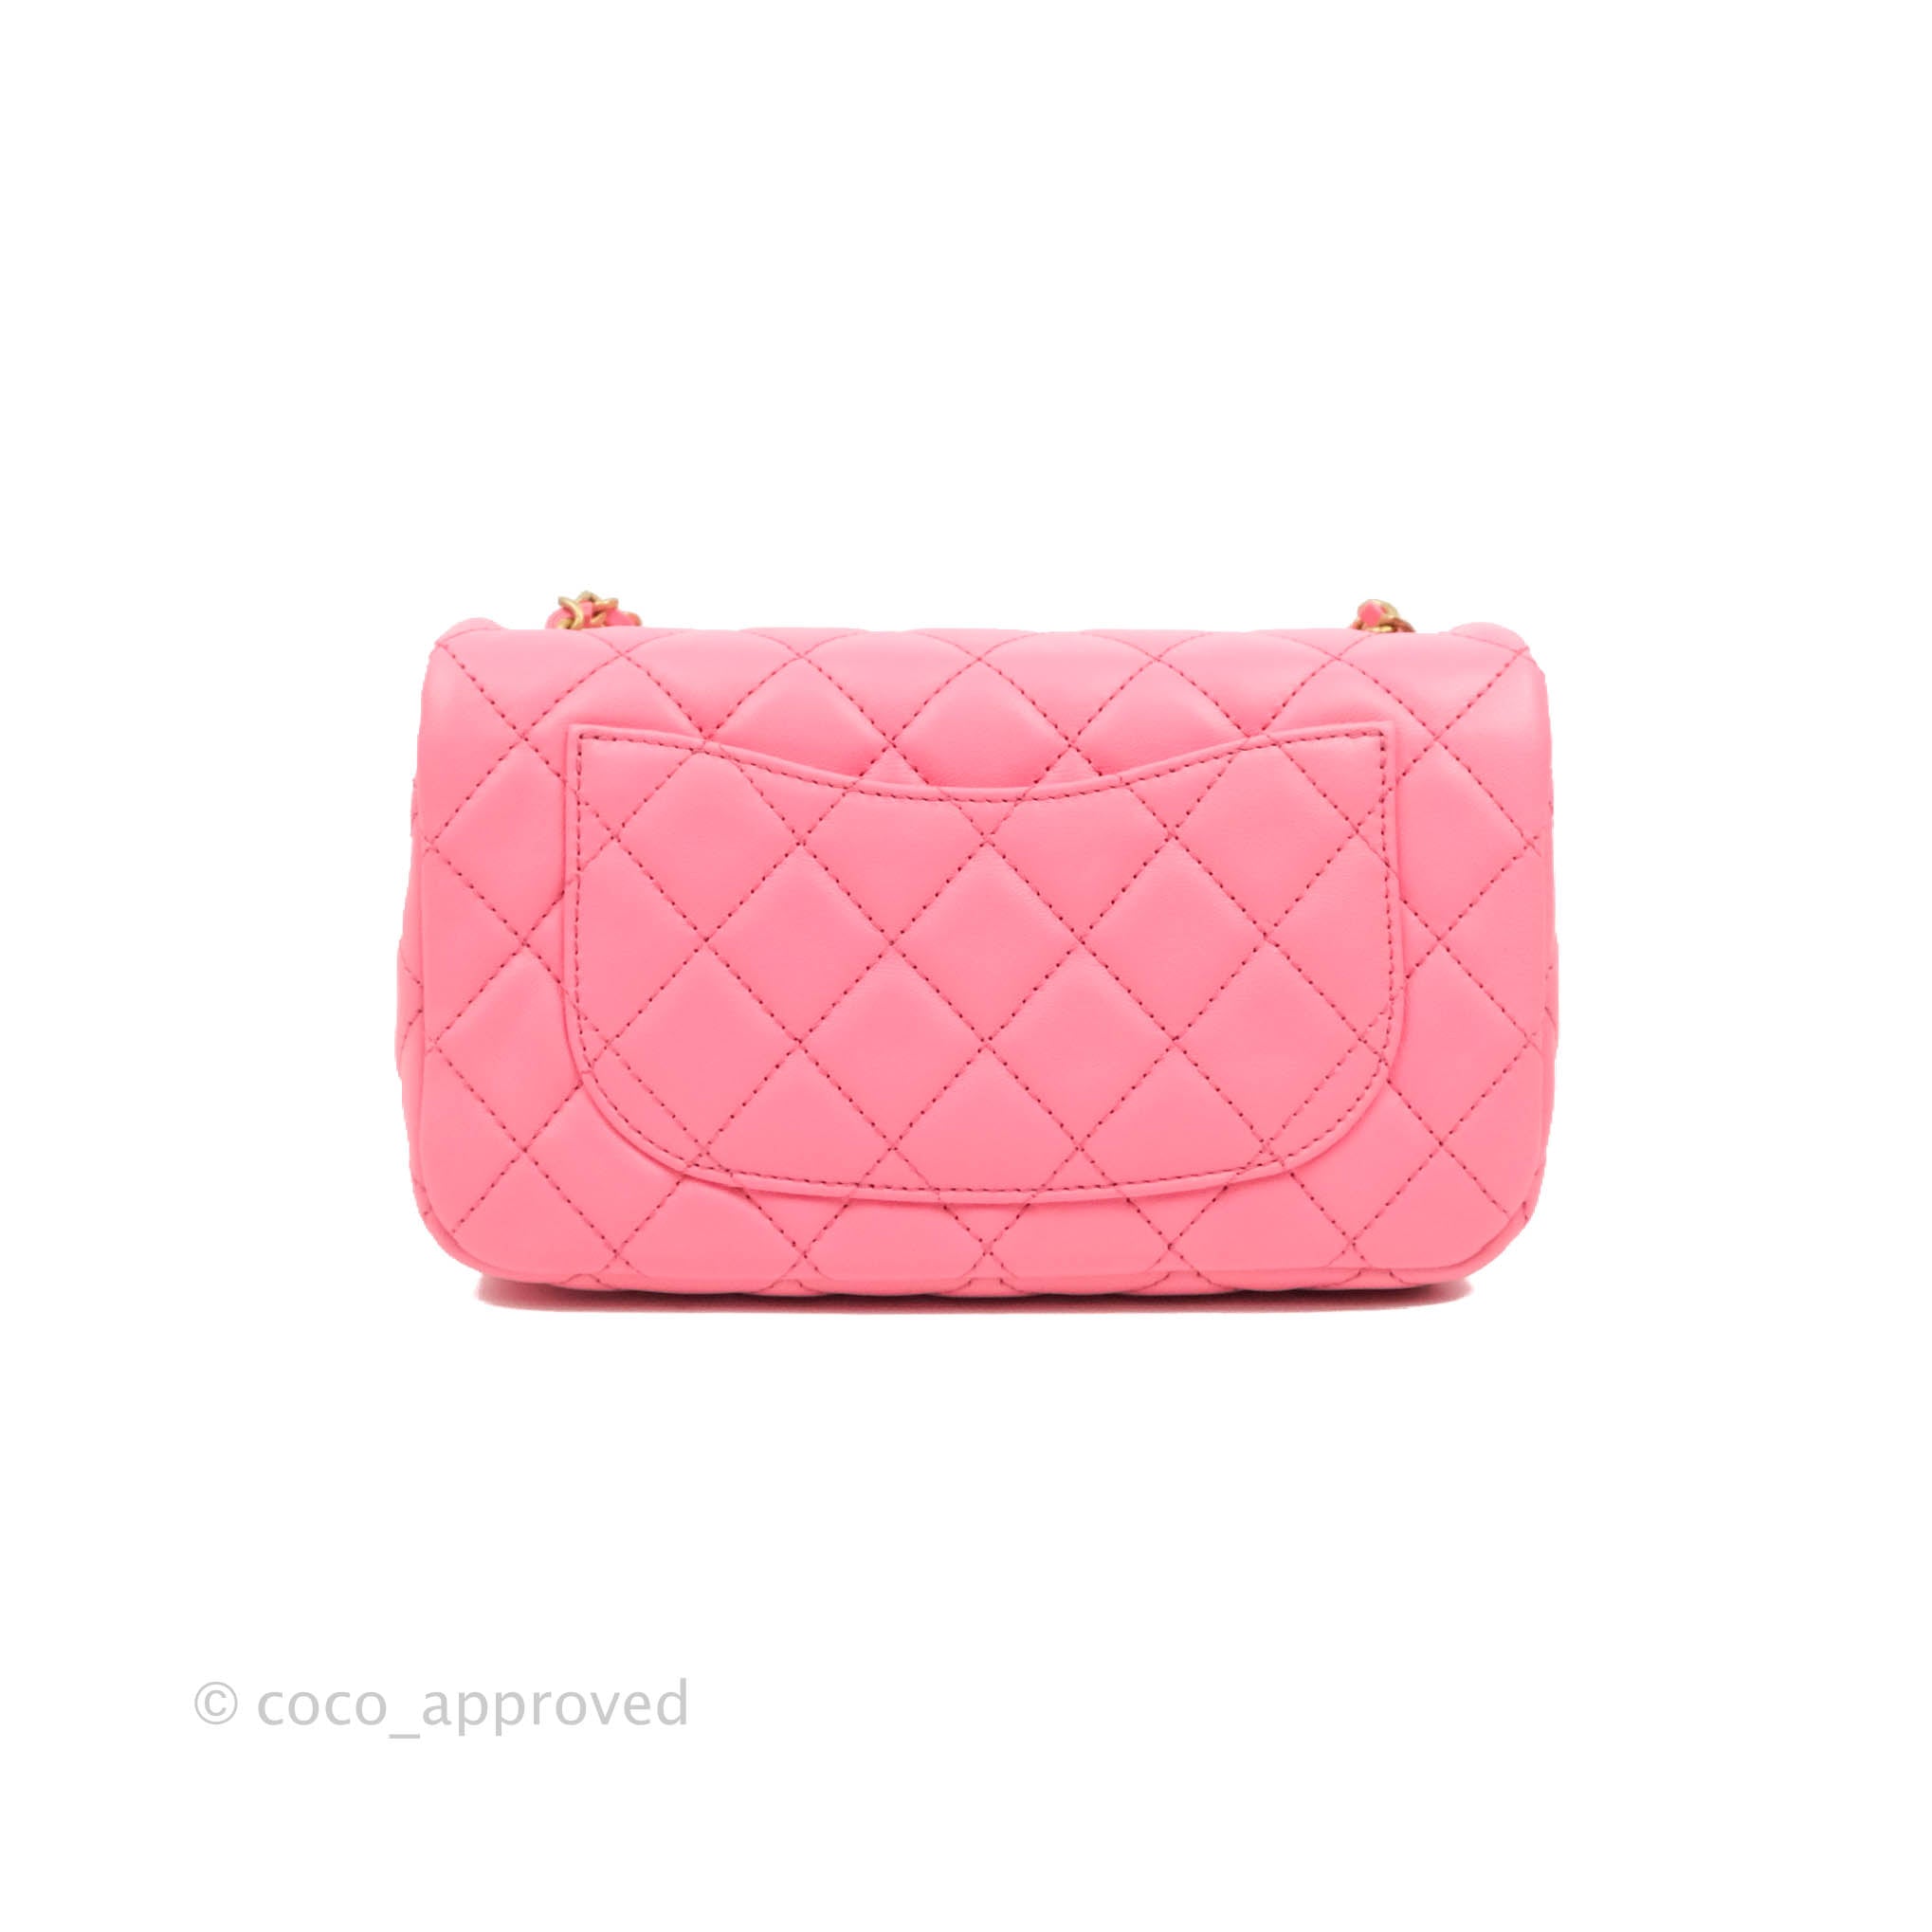 Chanel Mini Rectangular Pearl Crush Quilted Pink Lambskin Aged